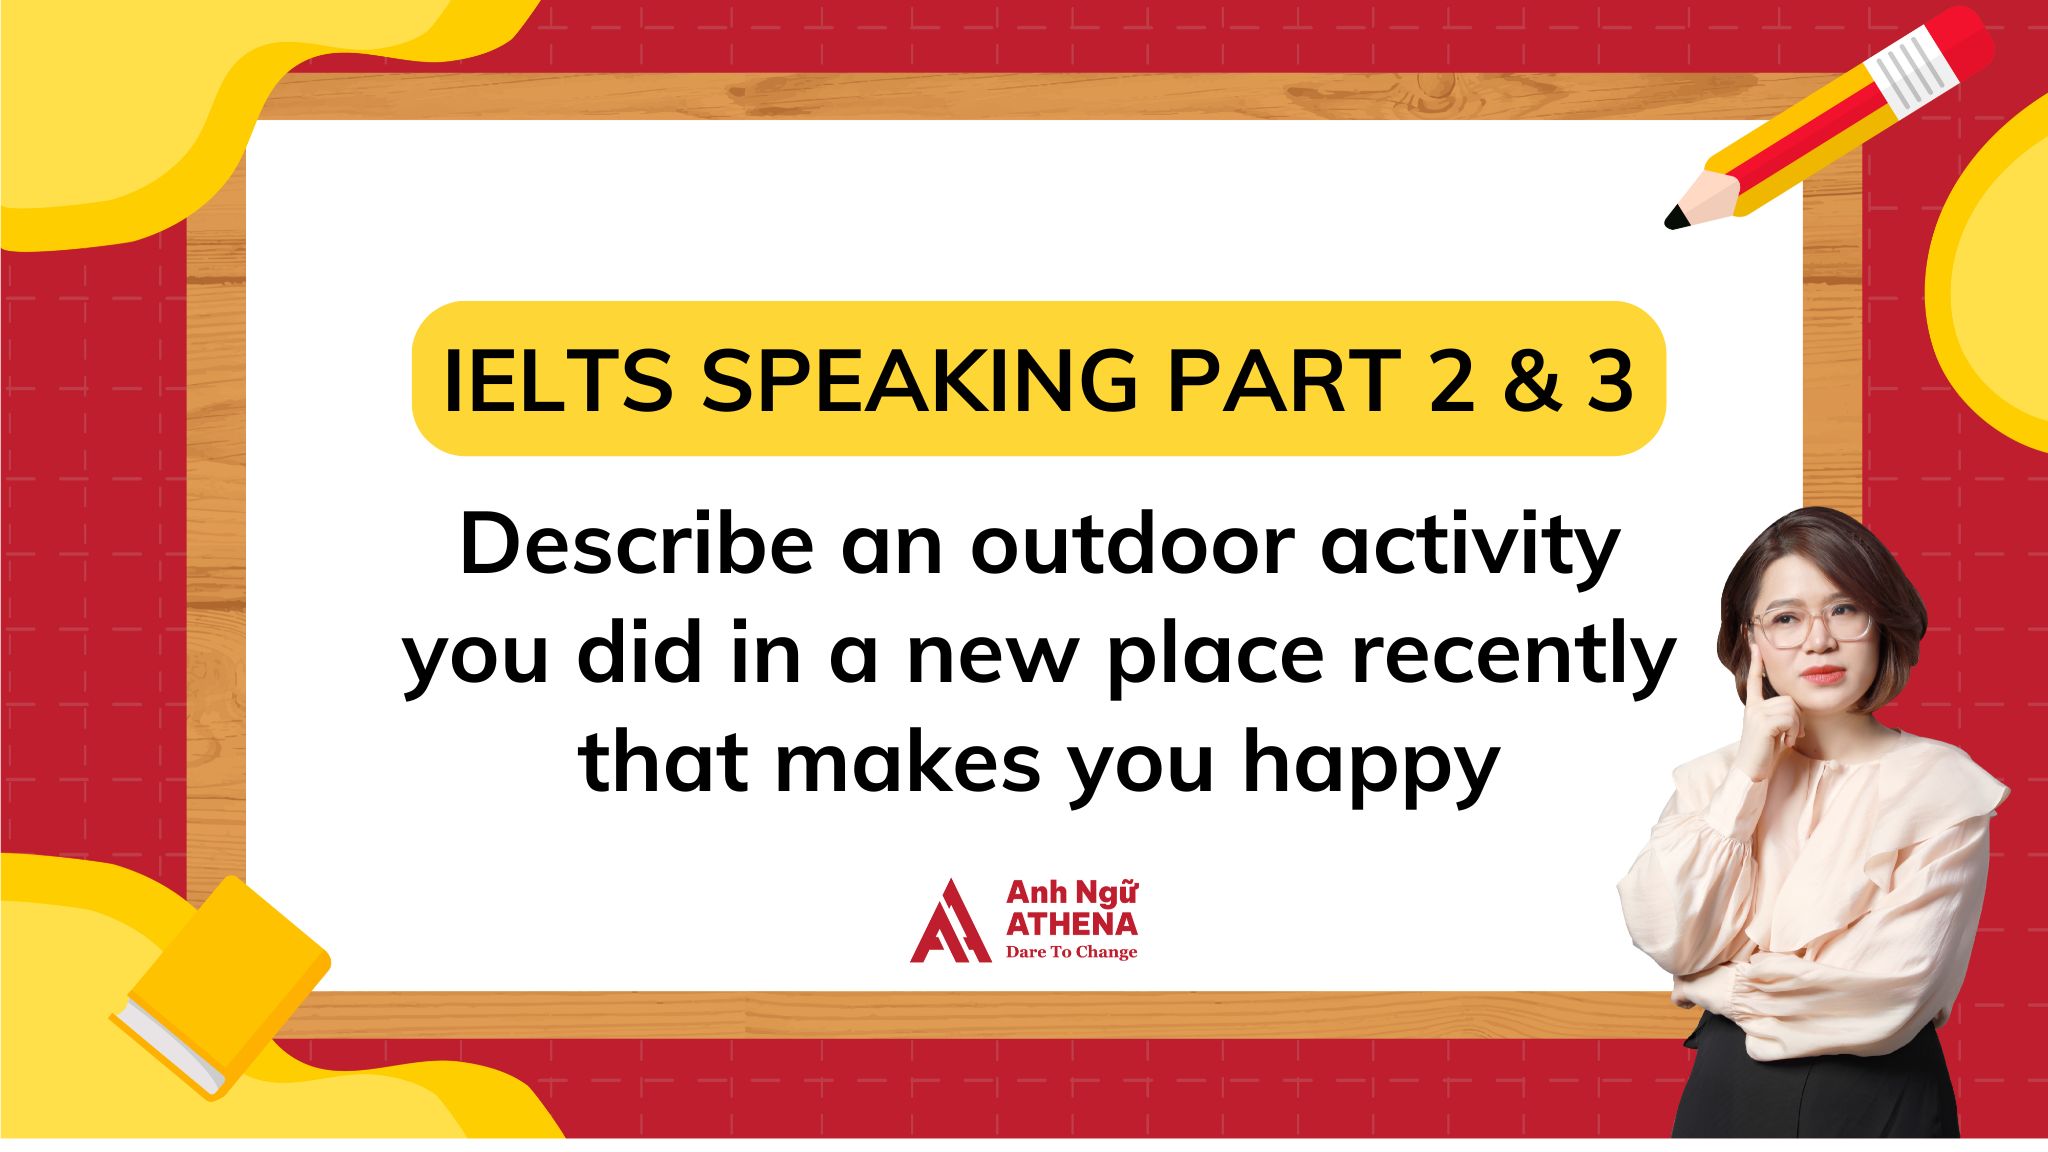 Giải đề: Describe an outdoor activity you did in a new place recently that makes you happy 